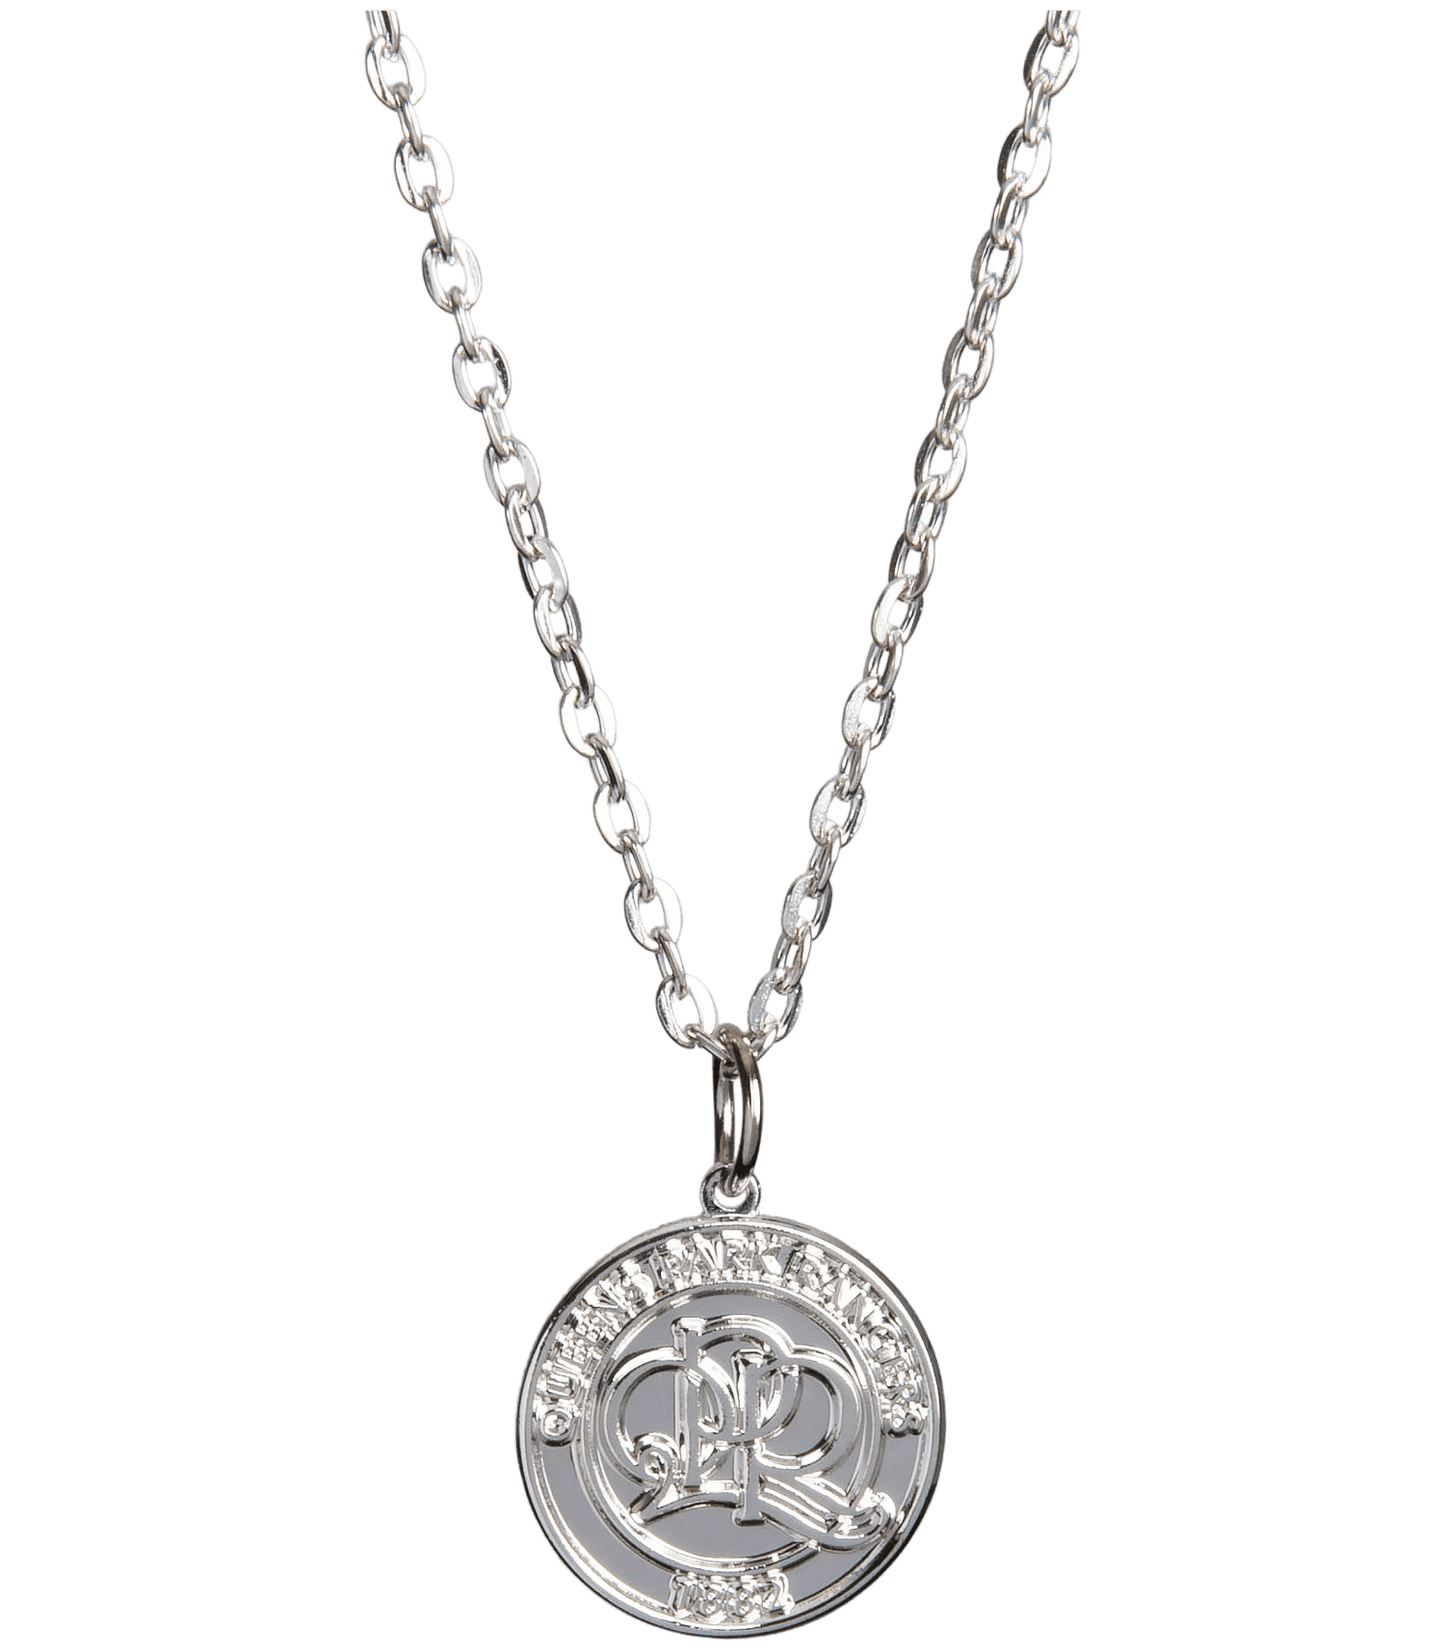 SILVER PLATED CREST PENDANT AND CHAIN